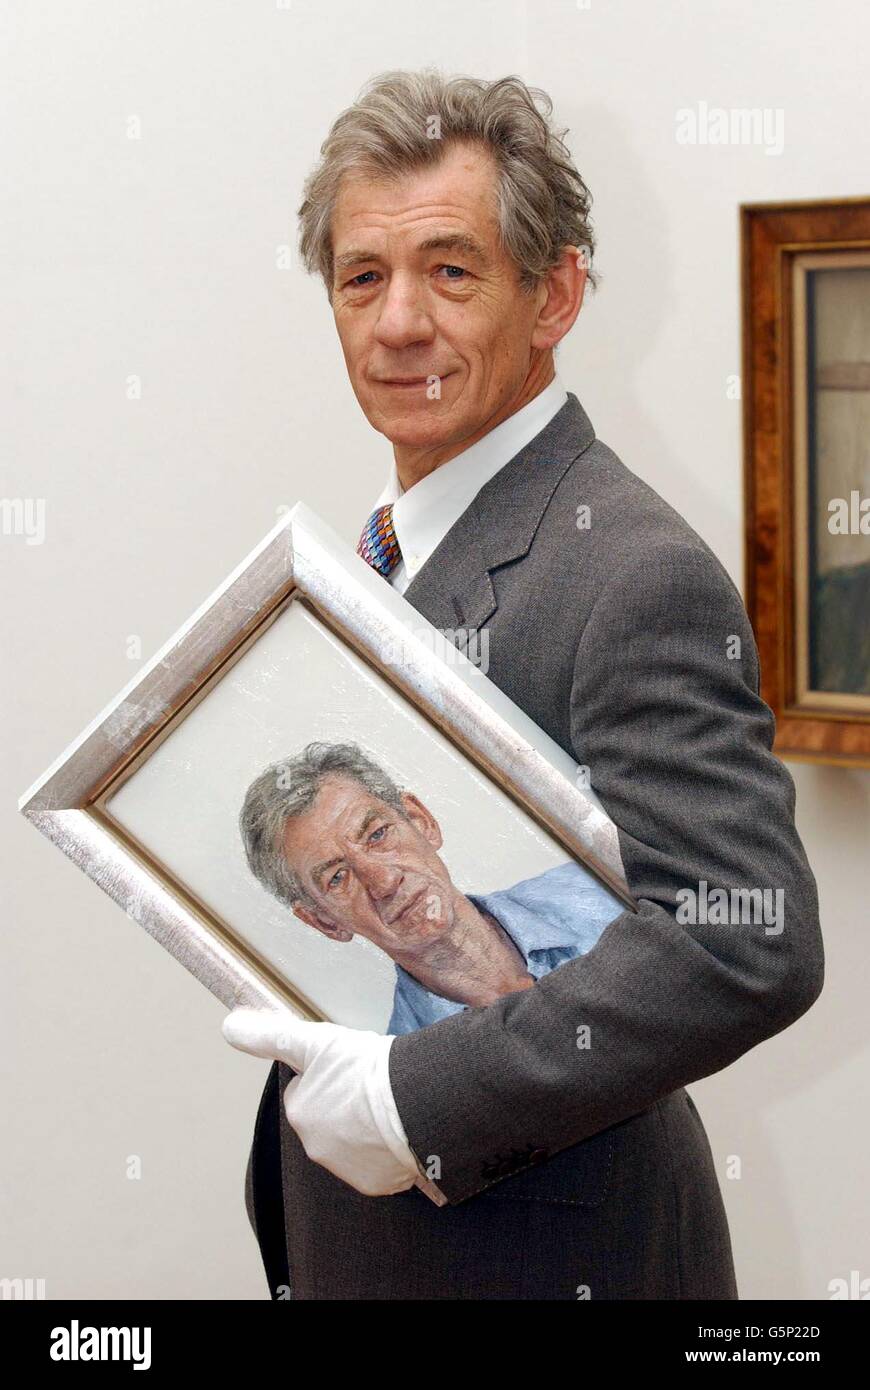 British actor Sir Ian McKellen with a new portrait of himself by Clive Smith during a photocall at the National Portrait Gallery in London. The work will go on public display from Wednesday 27 February 2002. The work has been commissioned by the National Portrait Gallery, * from the artist, who is a previous winner of the BP Portrait Award, as part of this prize. Stock Photo